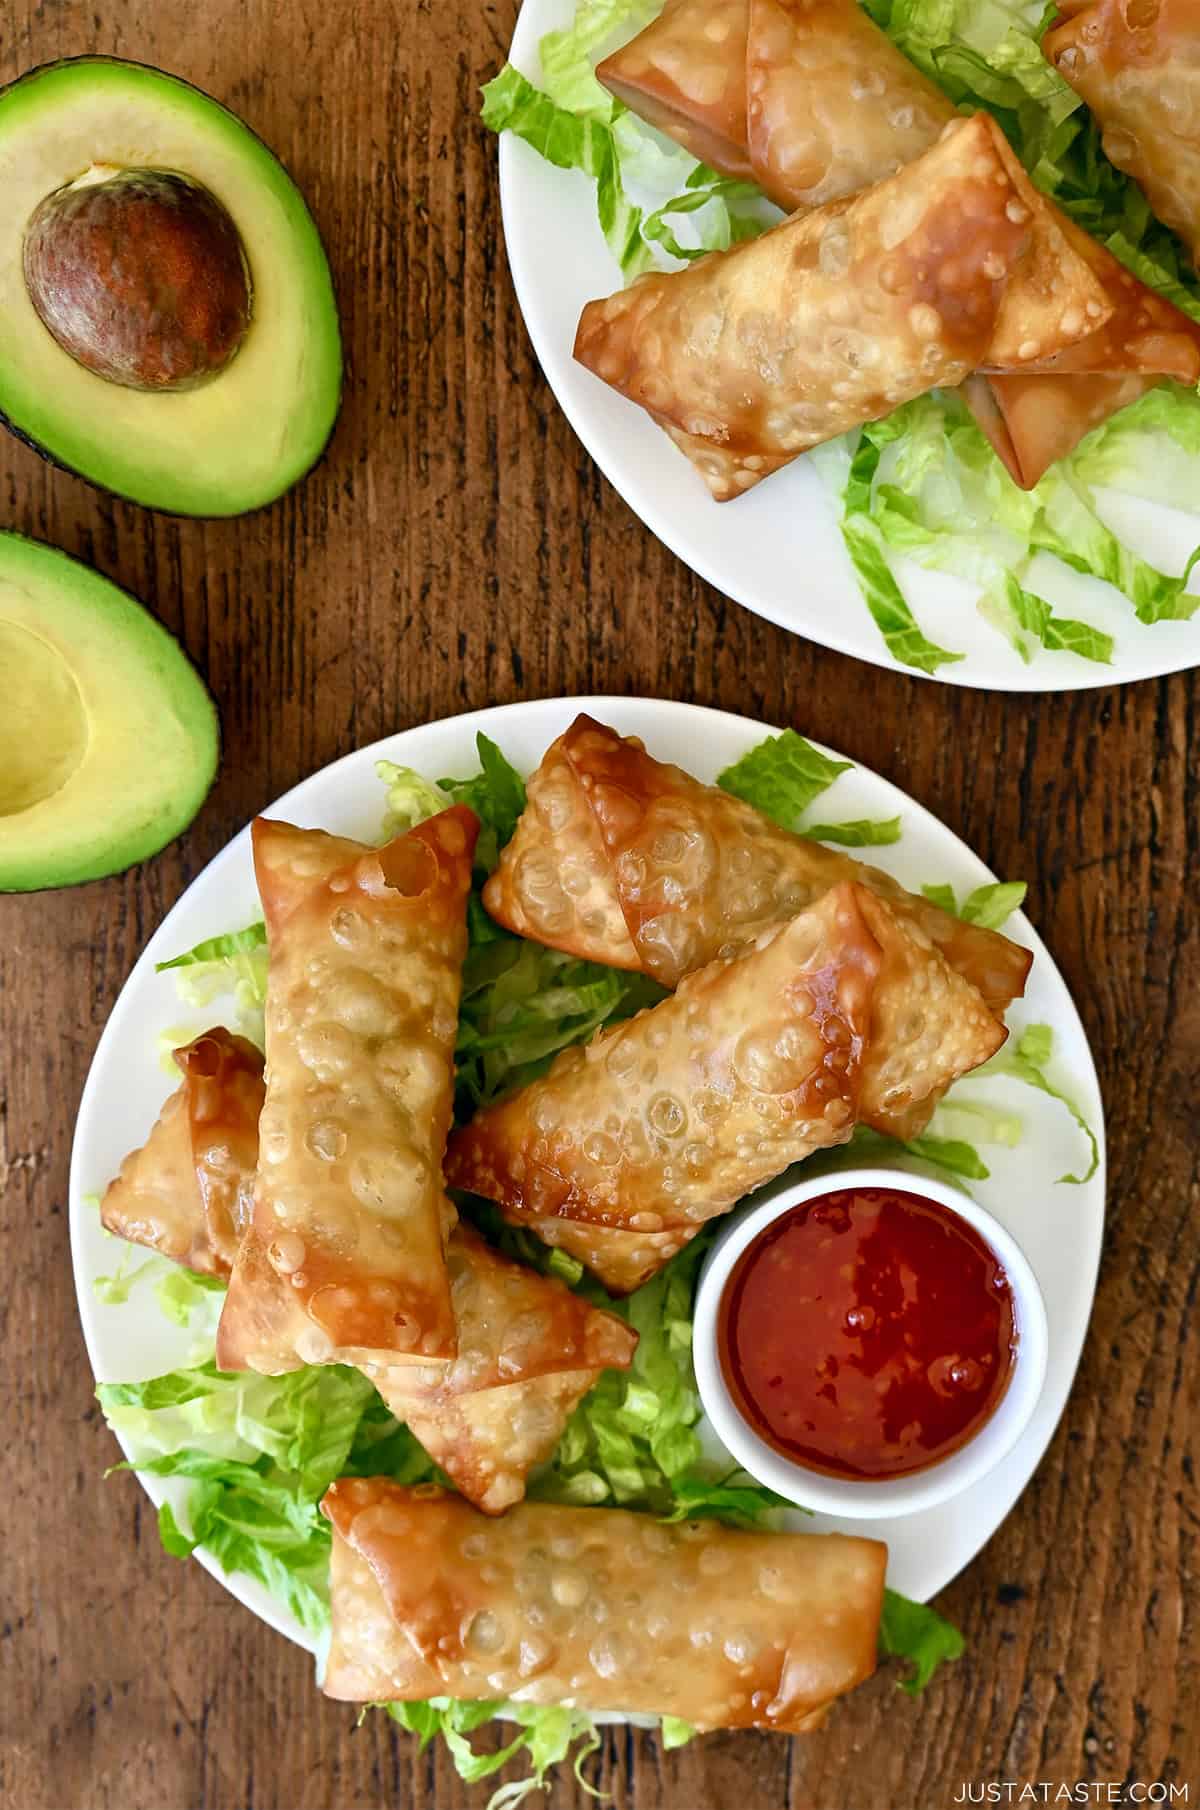 Avocado egg rolls atop shredded lettuce on a plate with a small bowl containing sweet chili sauce.